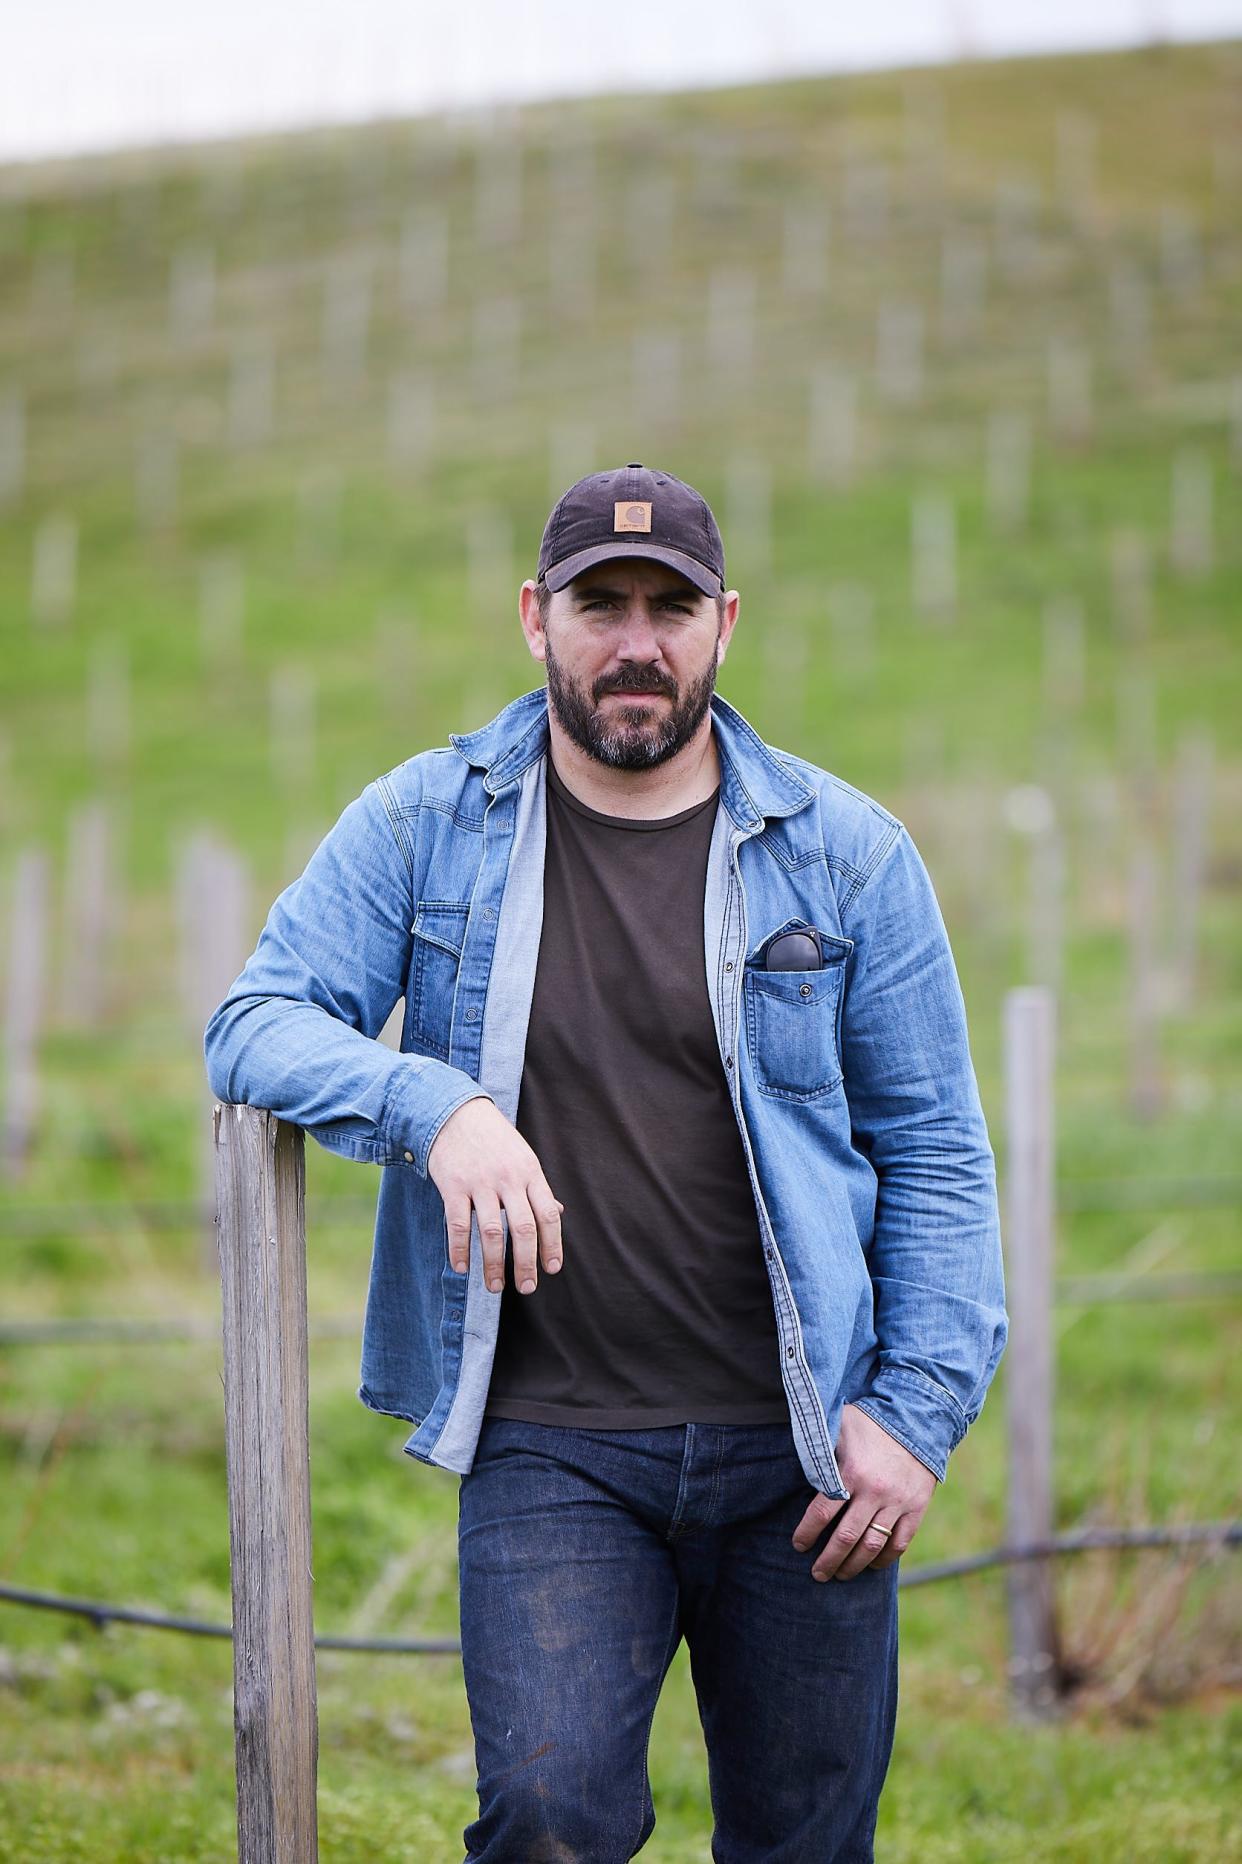 Matt Naumann is the creator of Newfound Wines, a small California winery. The former Milwaukee-area resident is also president at Wade Cellars, making wine with Marquette University alumnus Dwyane Wade.